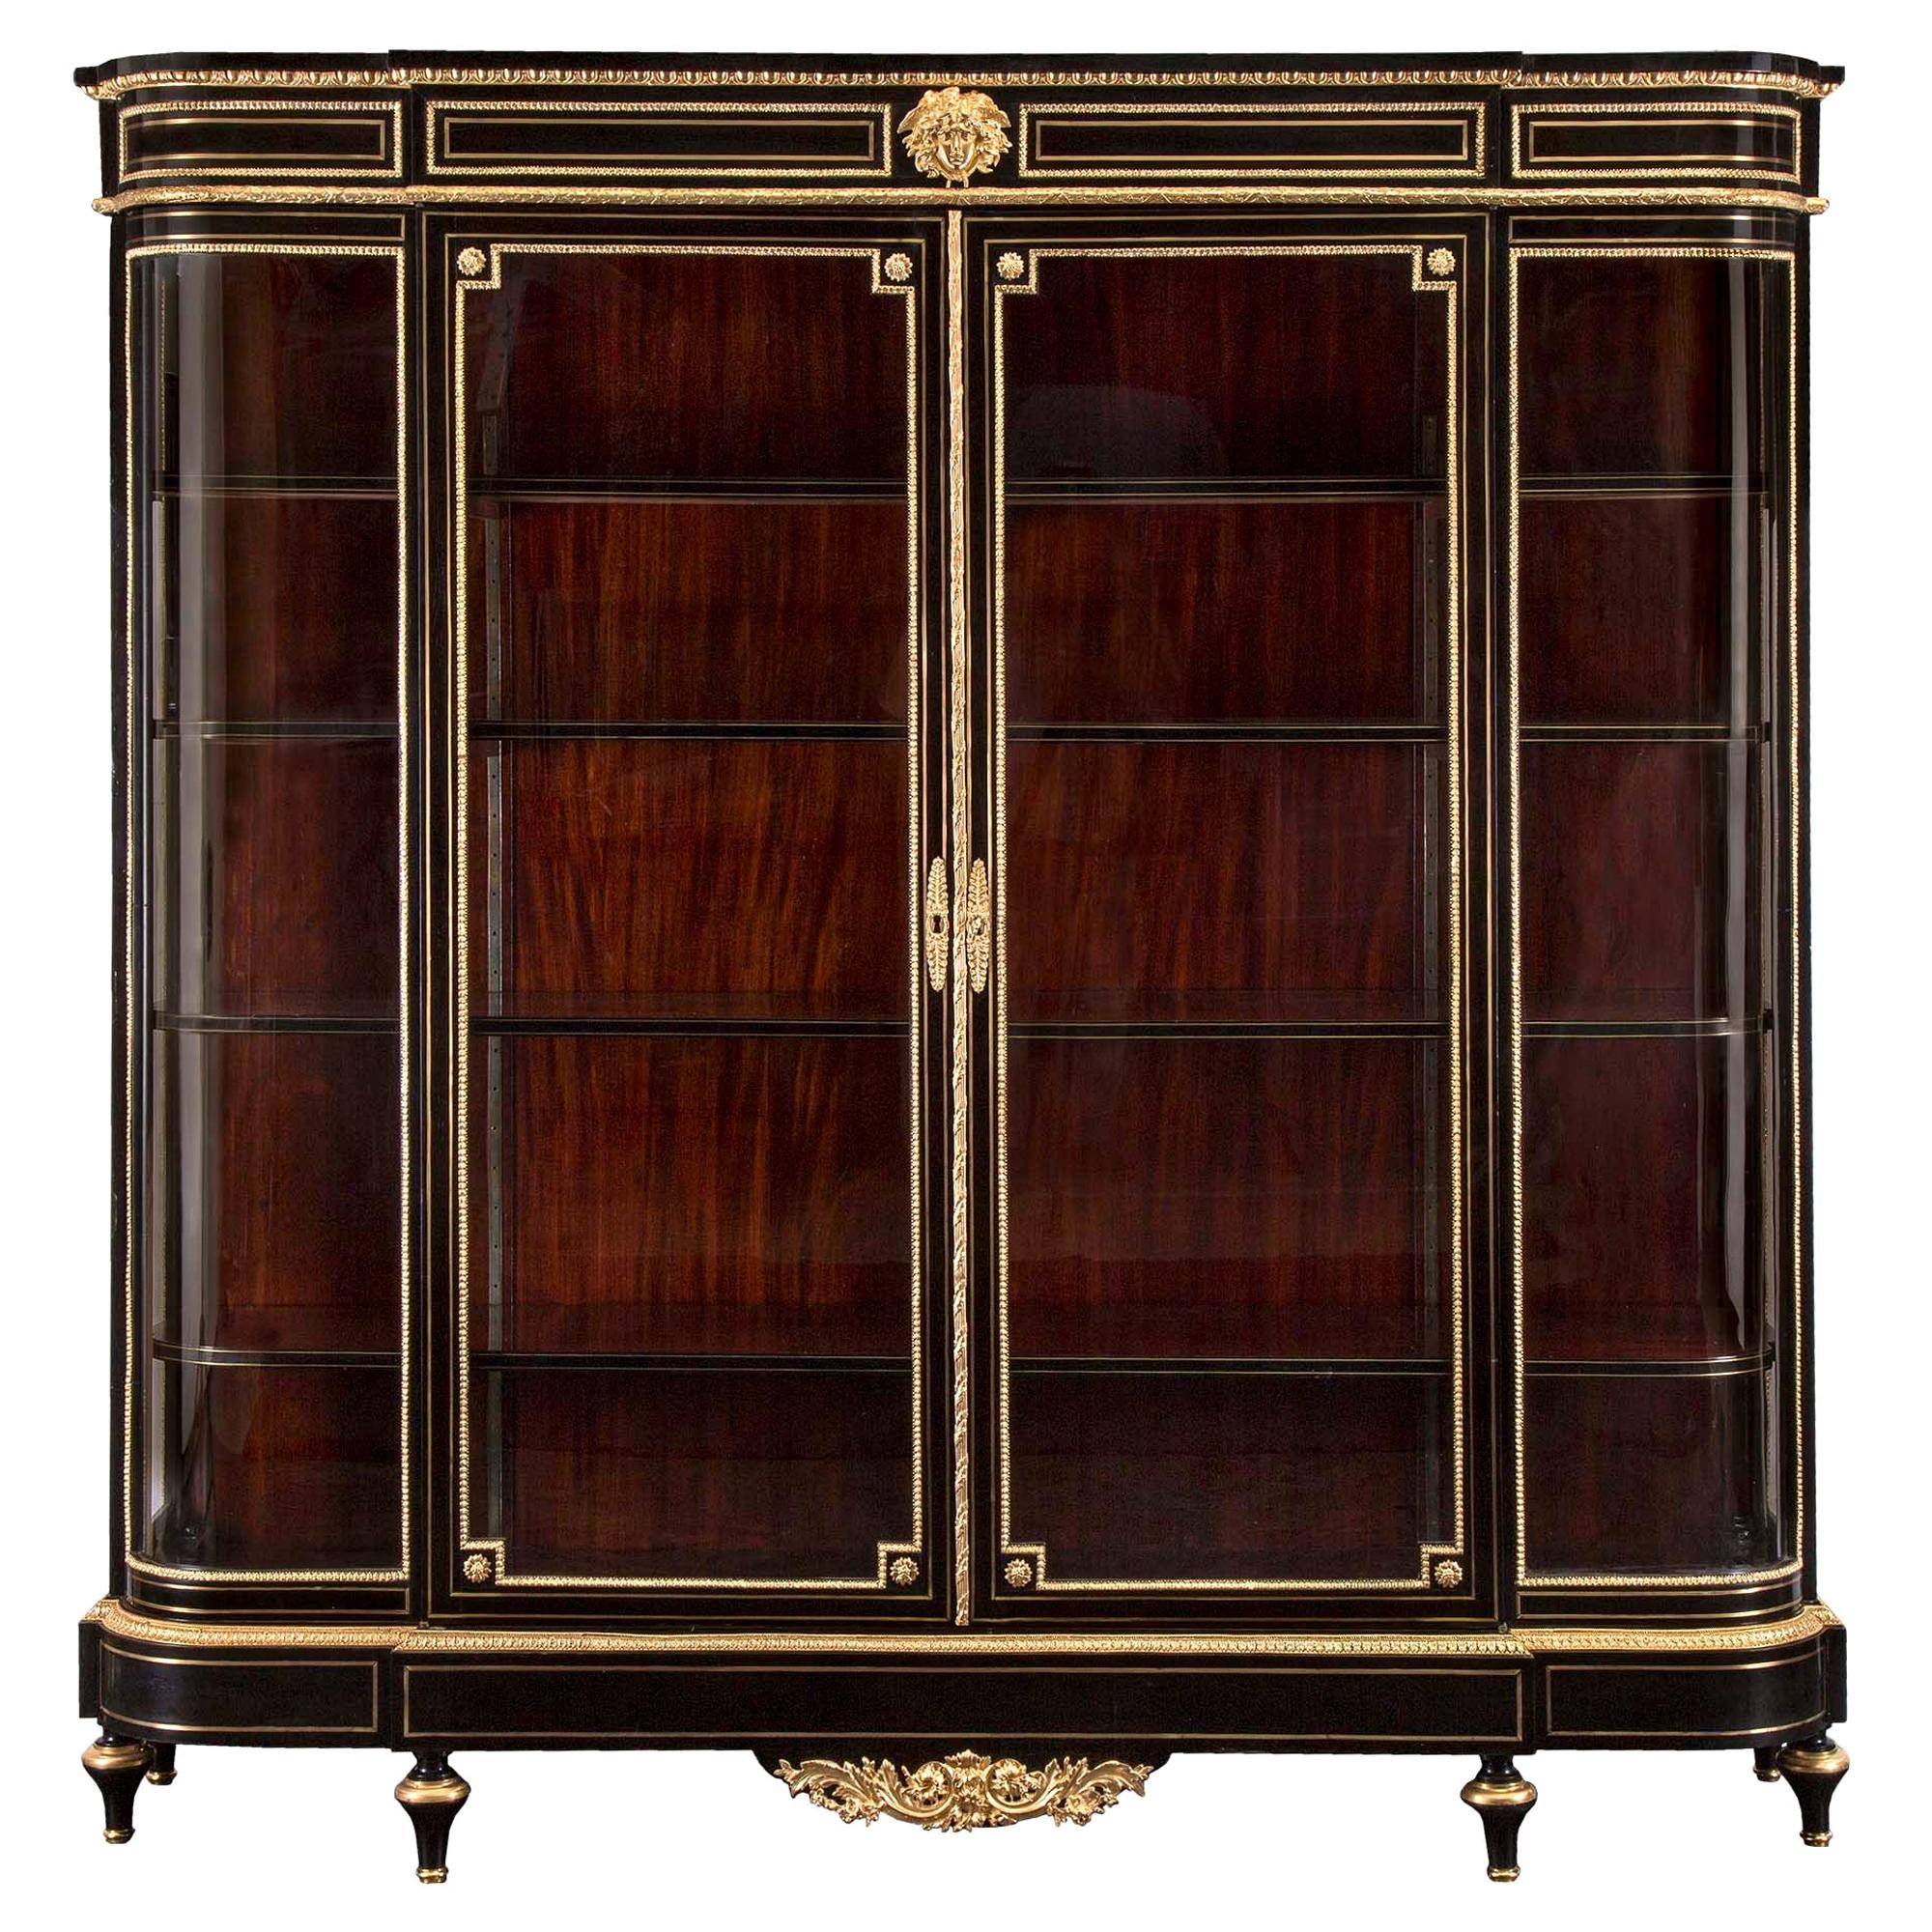 French 19th Century Napoleon III Period Ebony, Brass and Ormolu Boulle Vitrine For Sale